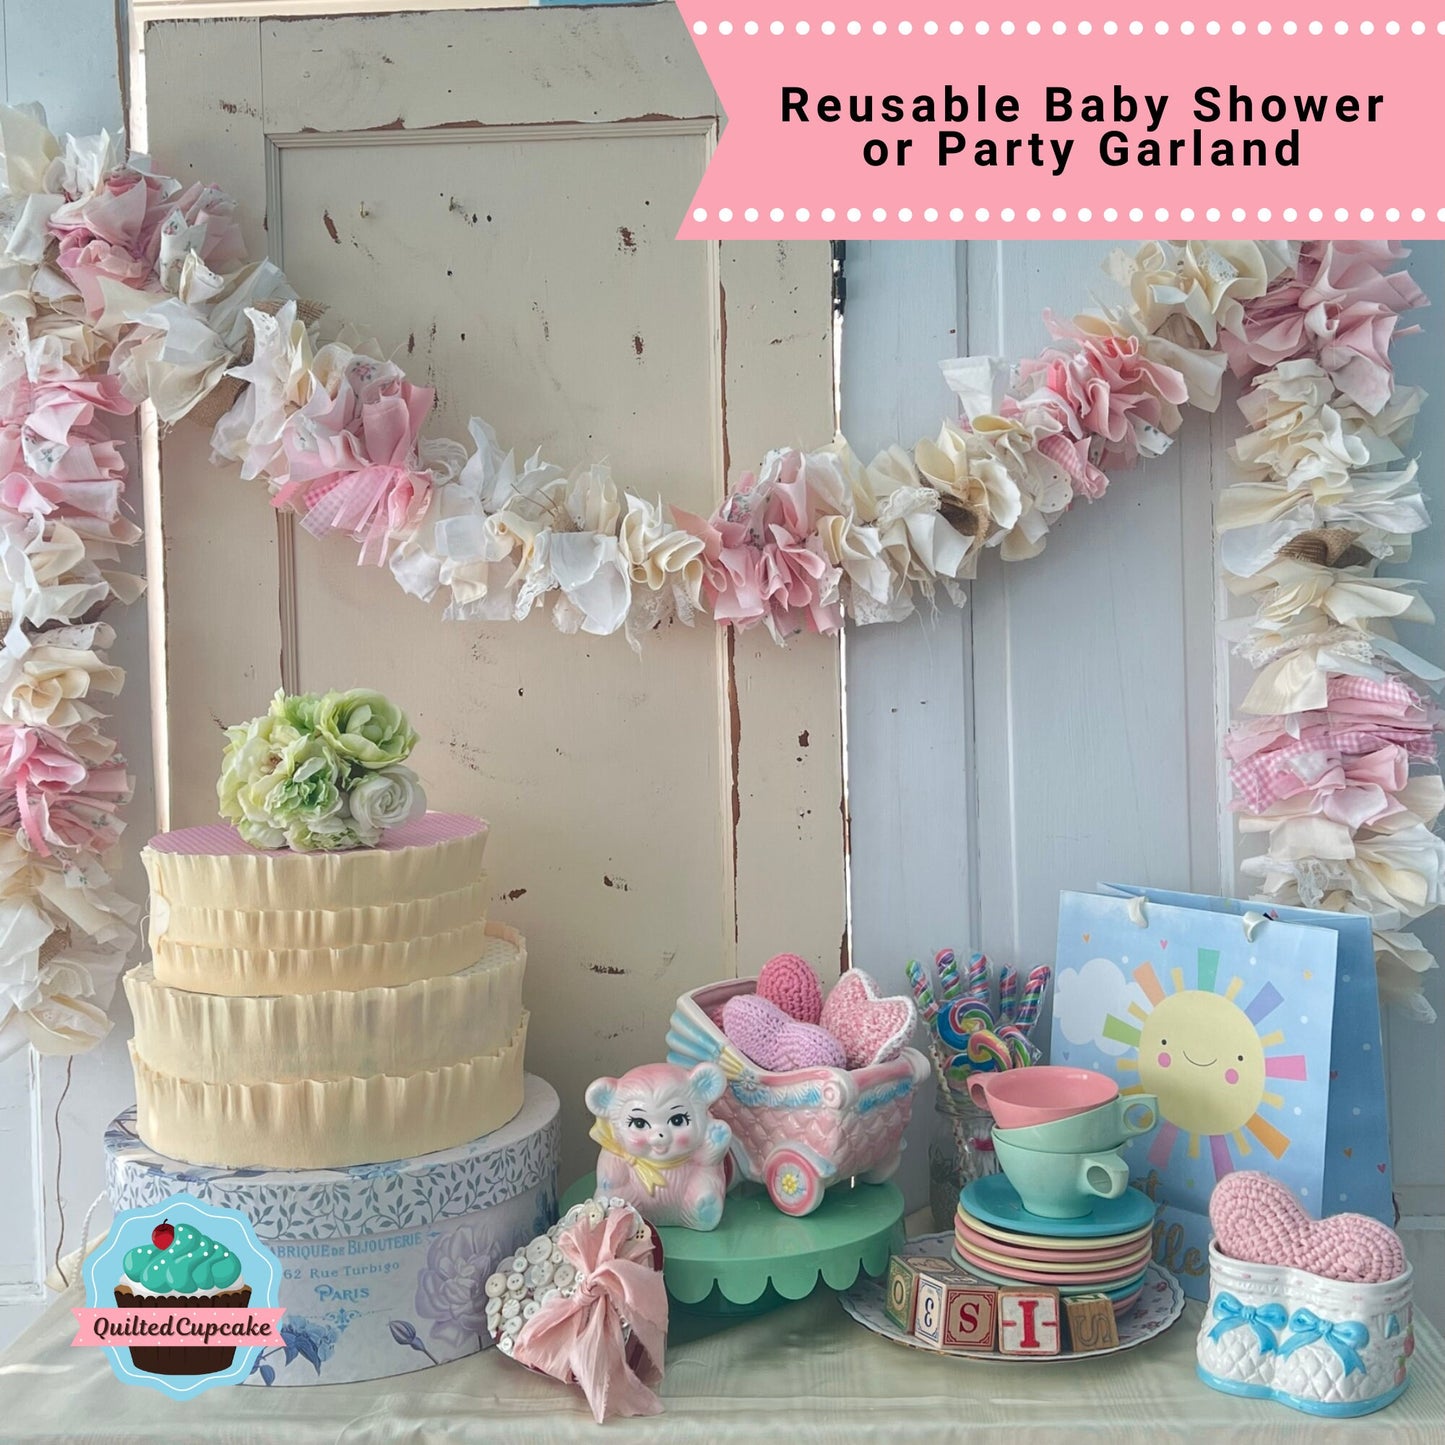 Baby Girl Burlap Shower Party Decoration.  6-10 foot fabric Garland Banner. Burlap and Pink Party Decor & Backdrop for Baby Girl Shower